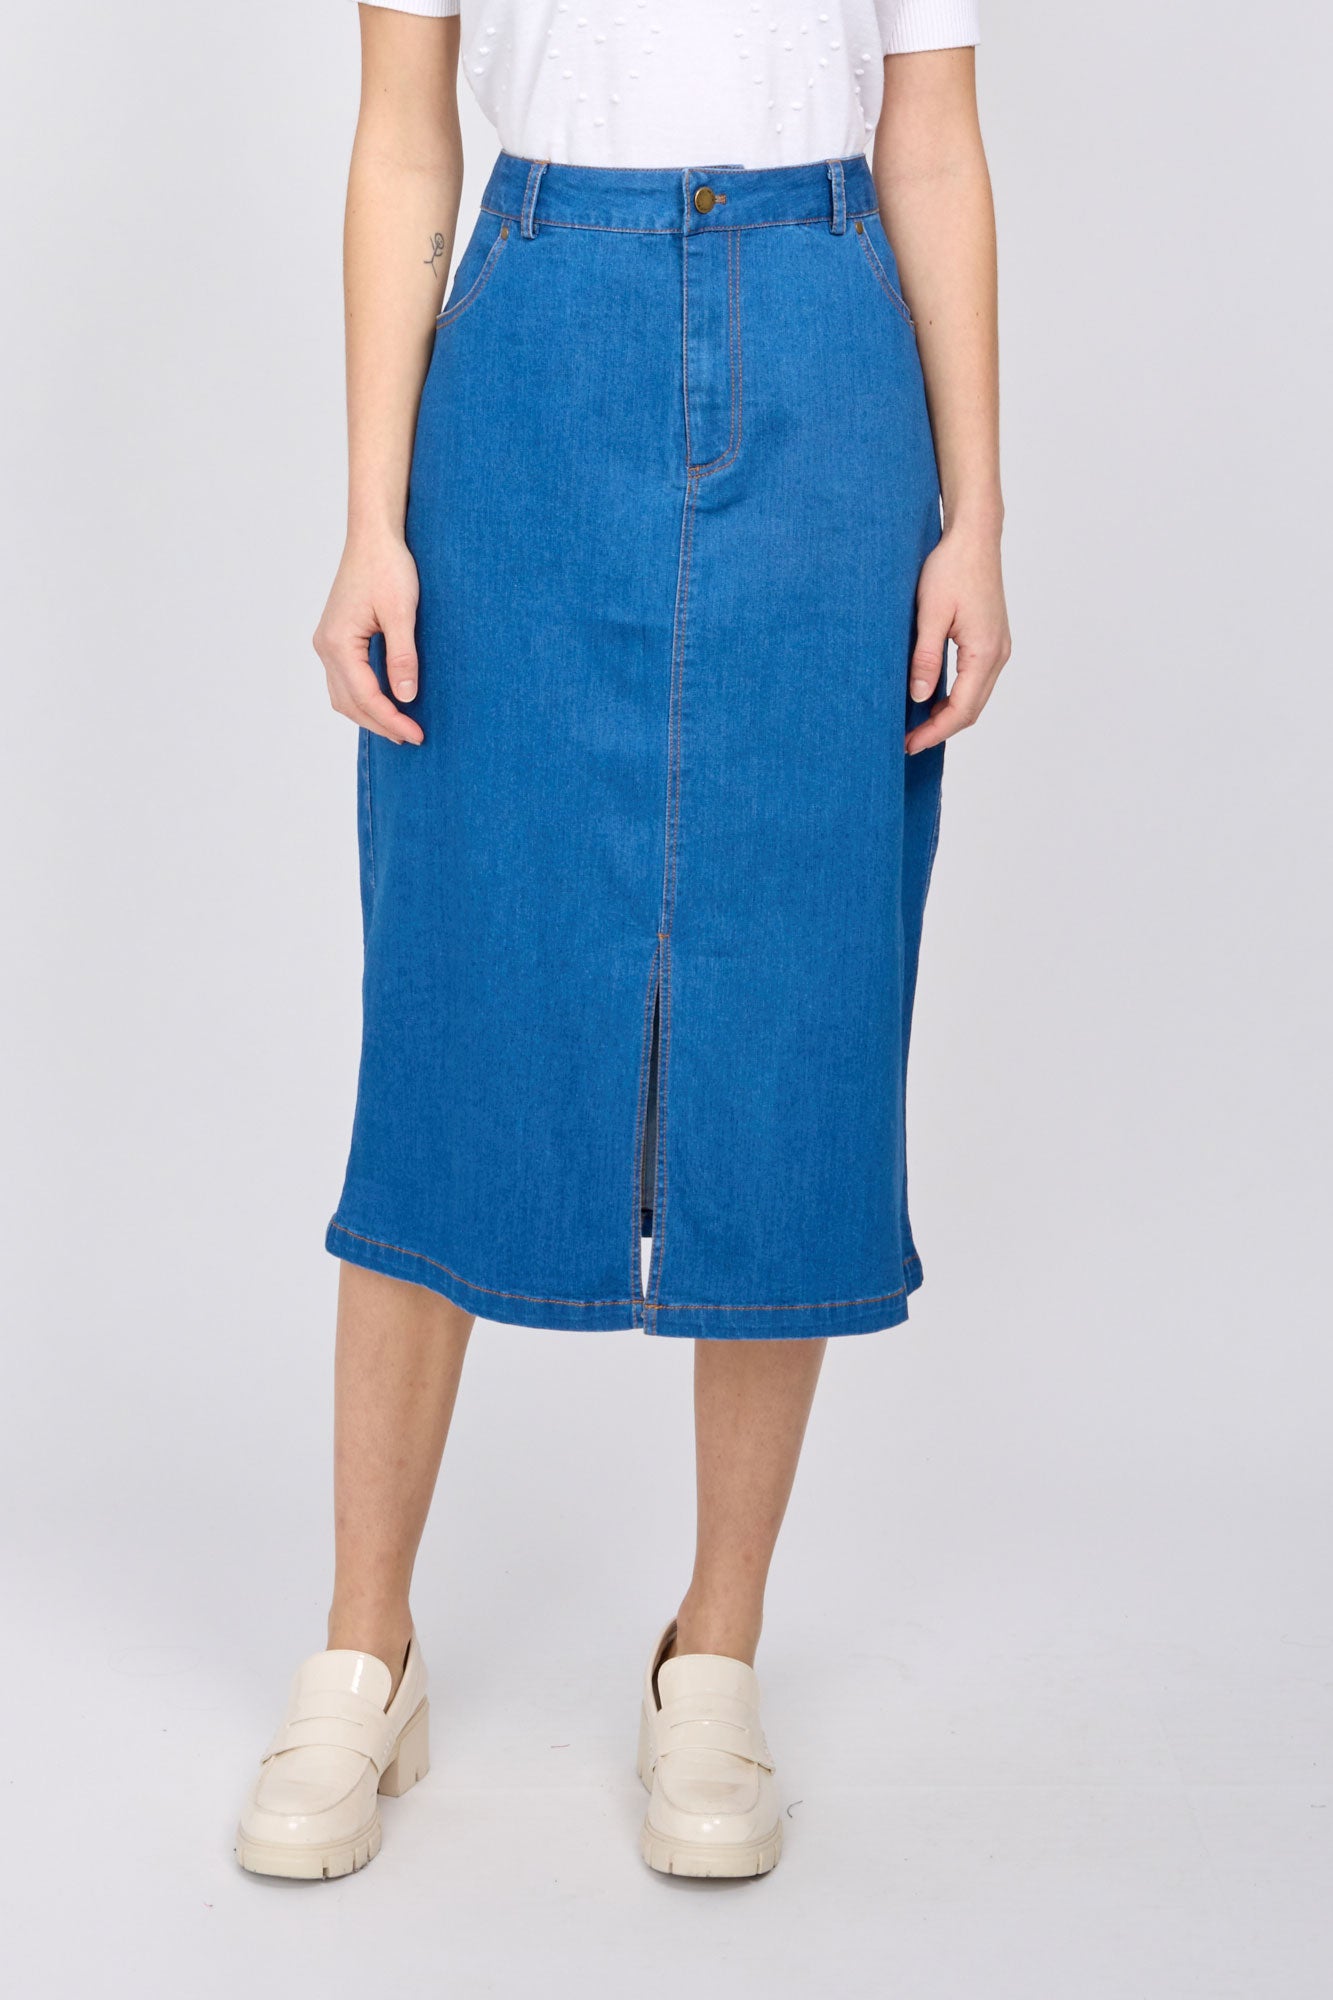 Chic Denim Long Skirt with Front Slit - Emproved